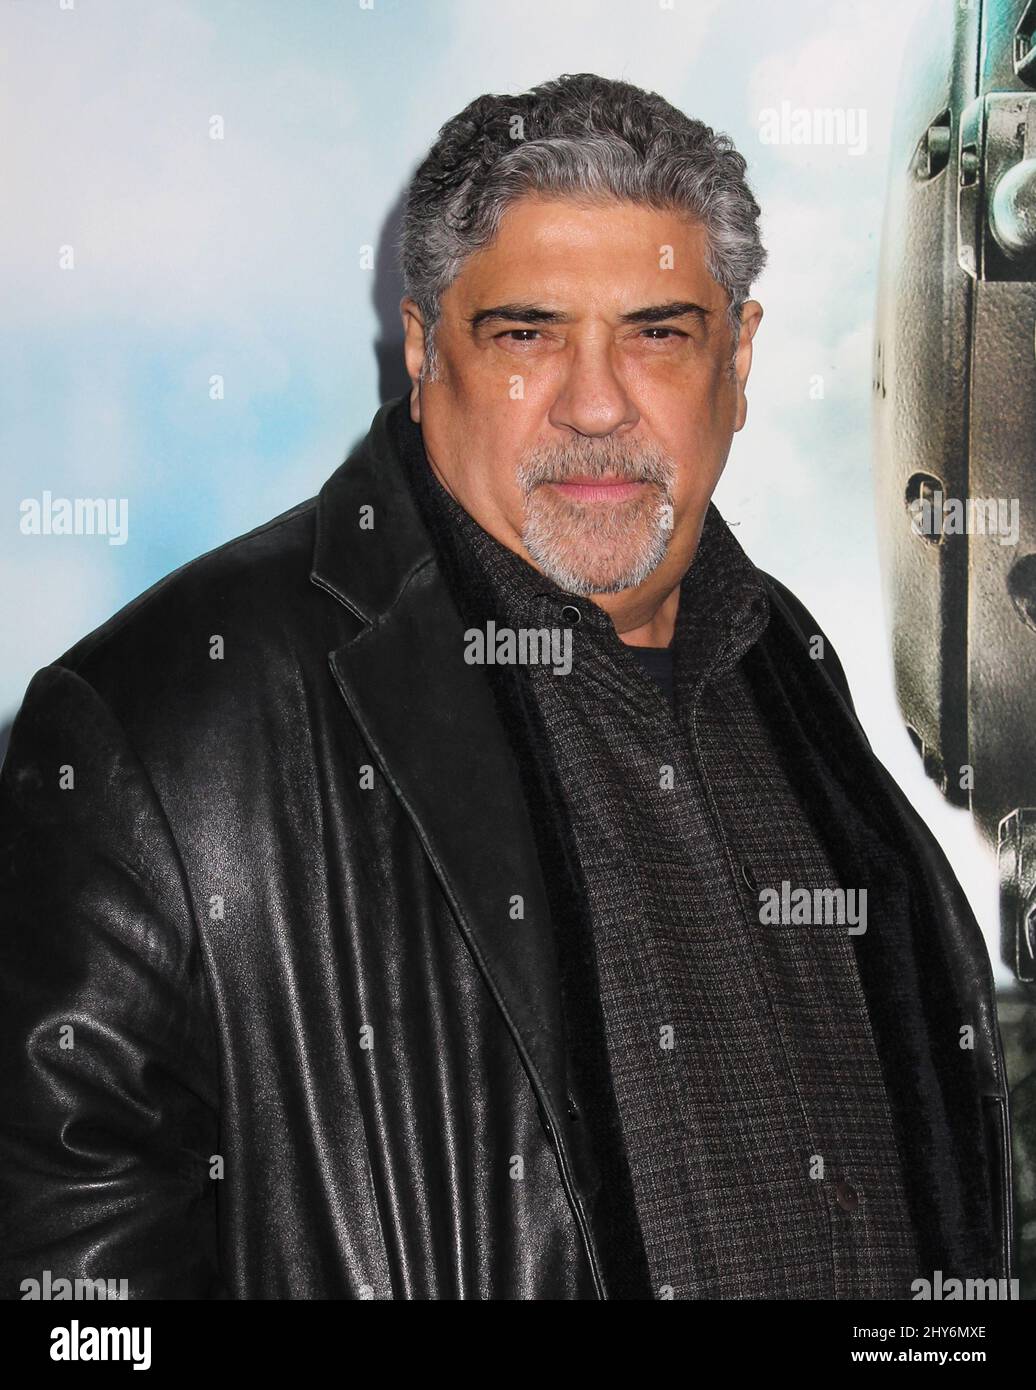 Vincent Pastore attending the Chappie premiere in New York Stock Photo